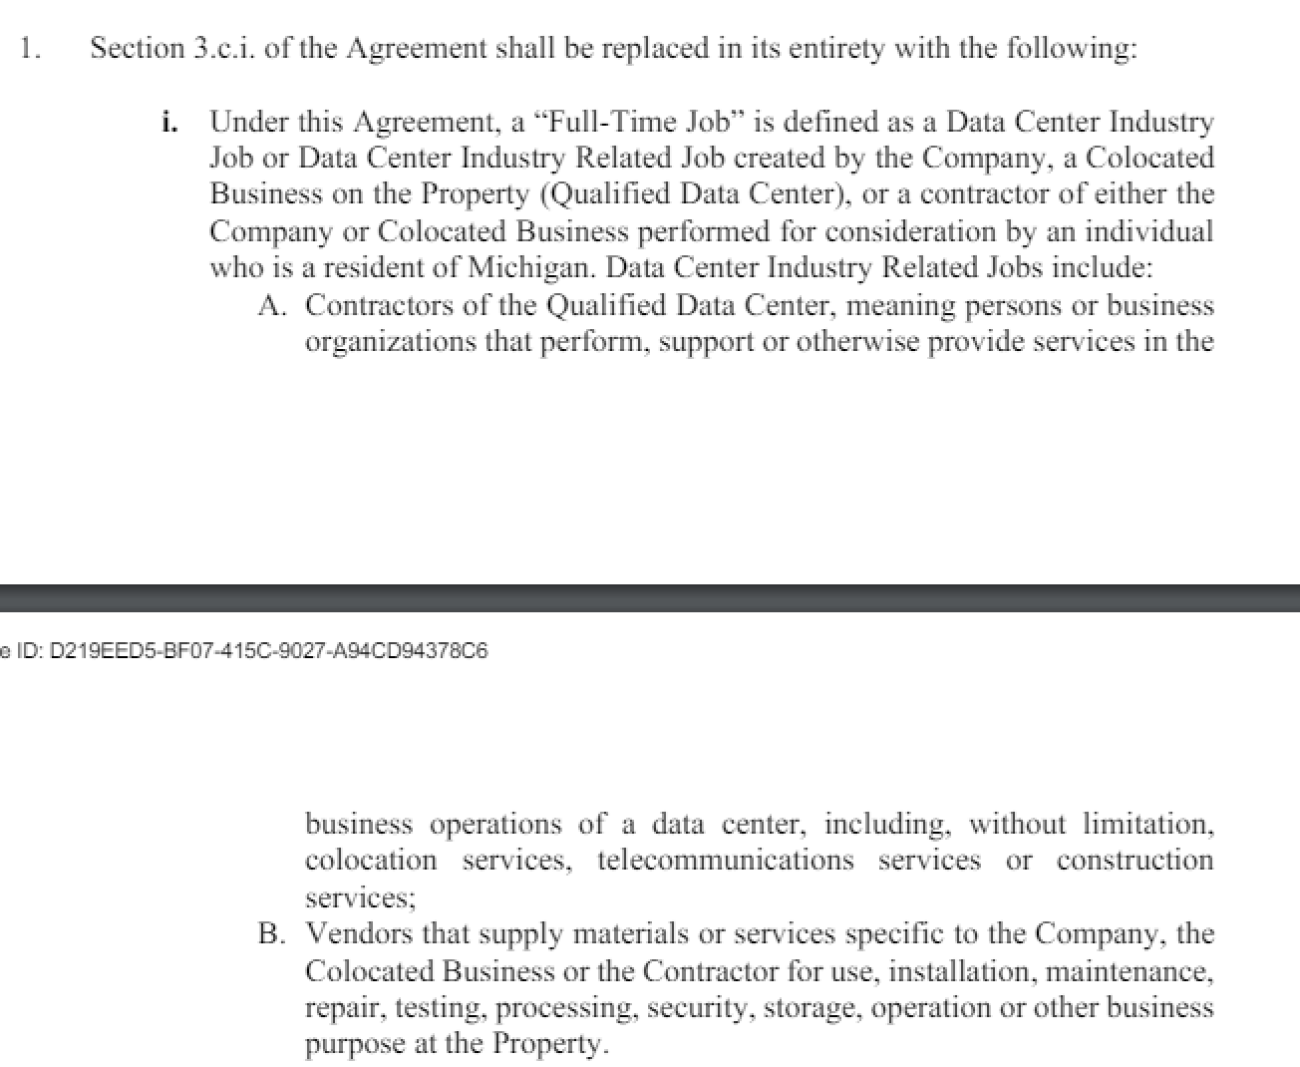 Amended agreement by Switch 